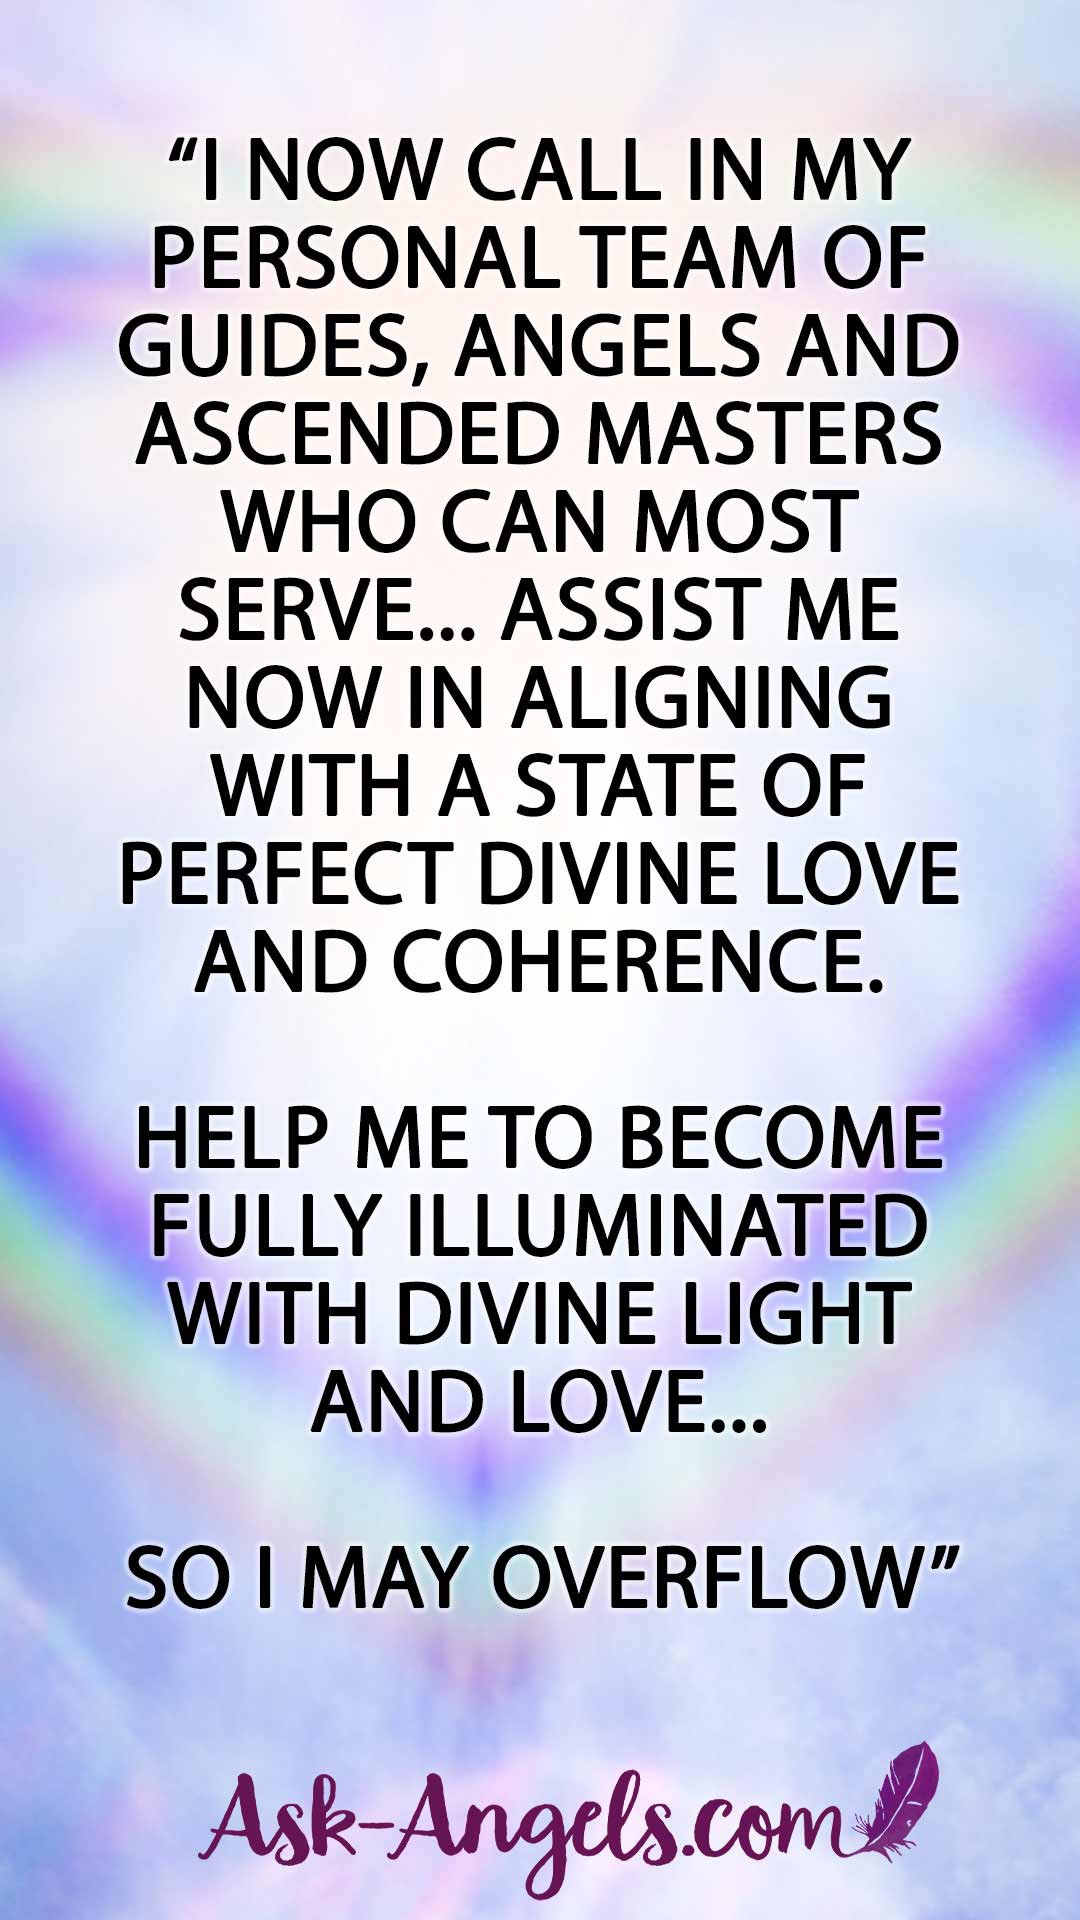 “I now call in my personal team of Guides, Angels and Ascended Masters who can most serve... Assist me now in aligning with a state of perfect divine love and coherence. Help me to become fully illuminated with divine light and love... So i may overflow”